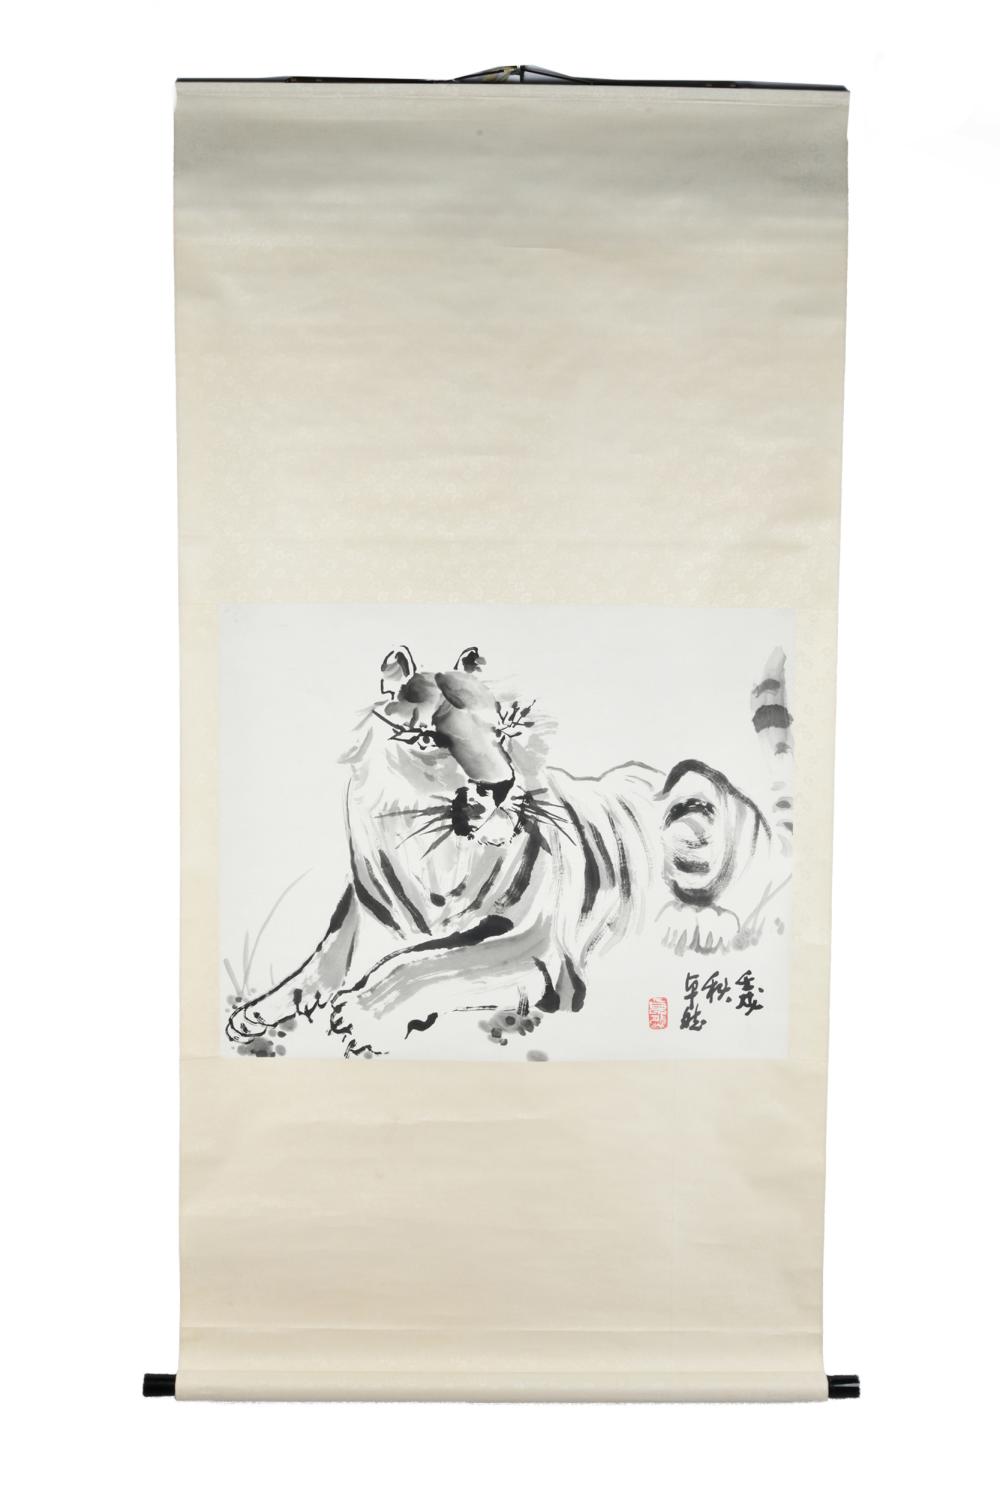 CHINESE TIGER SCROLLwith characters 3330b4